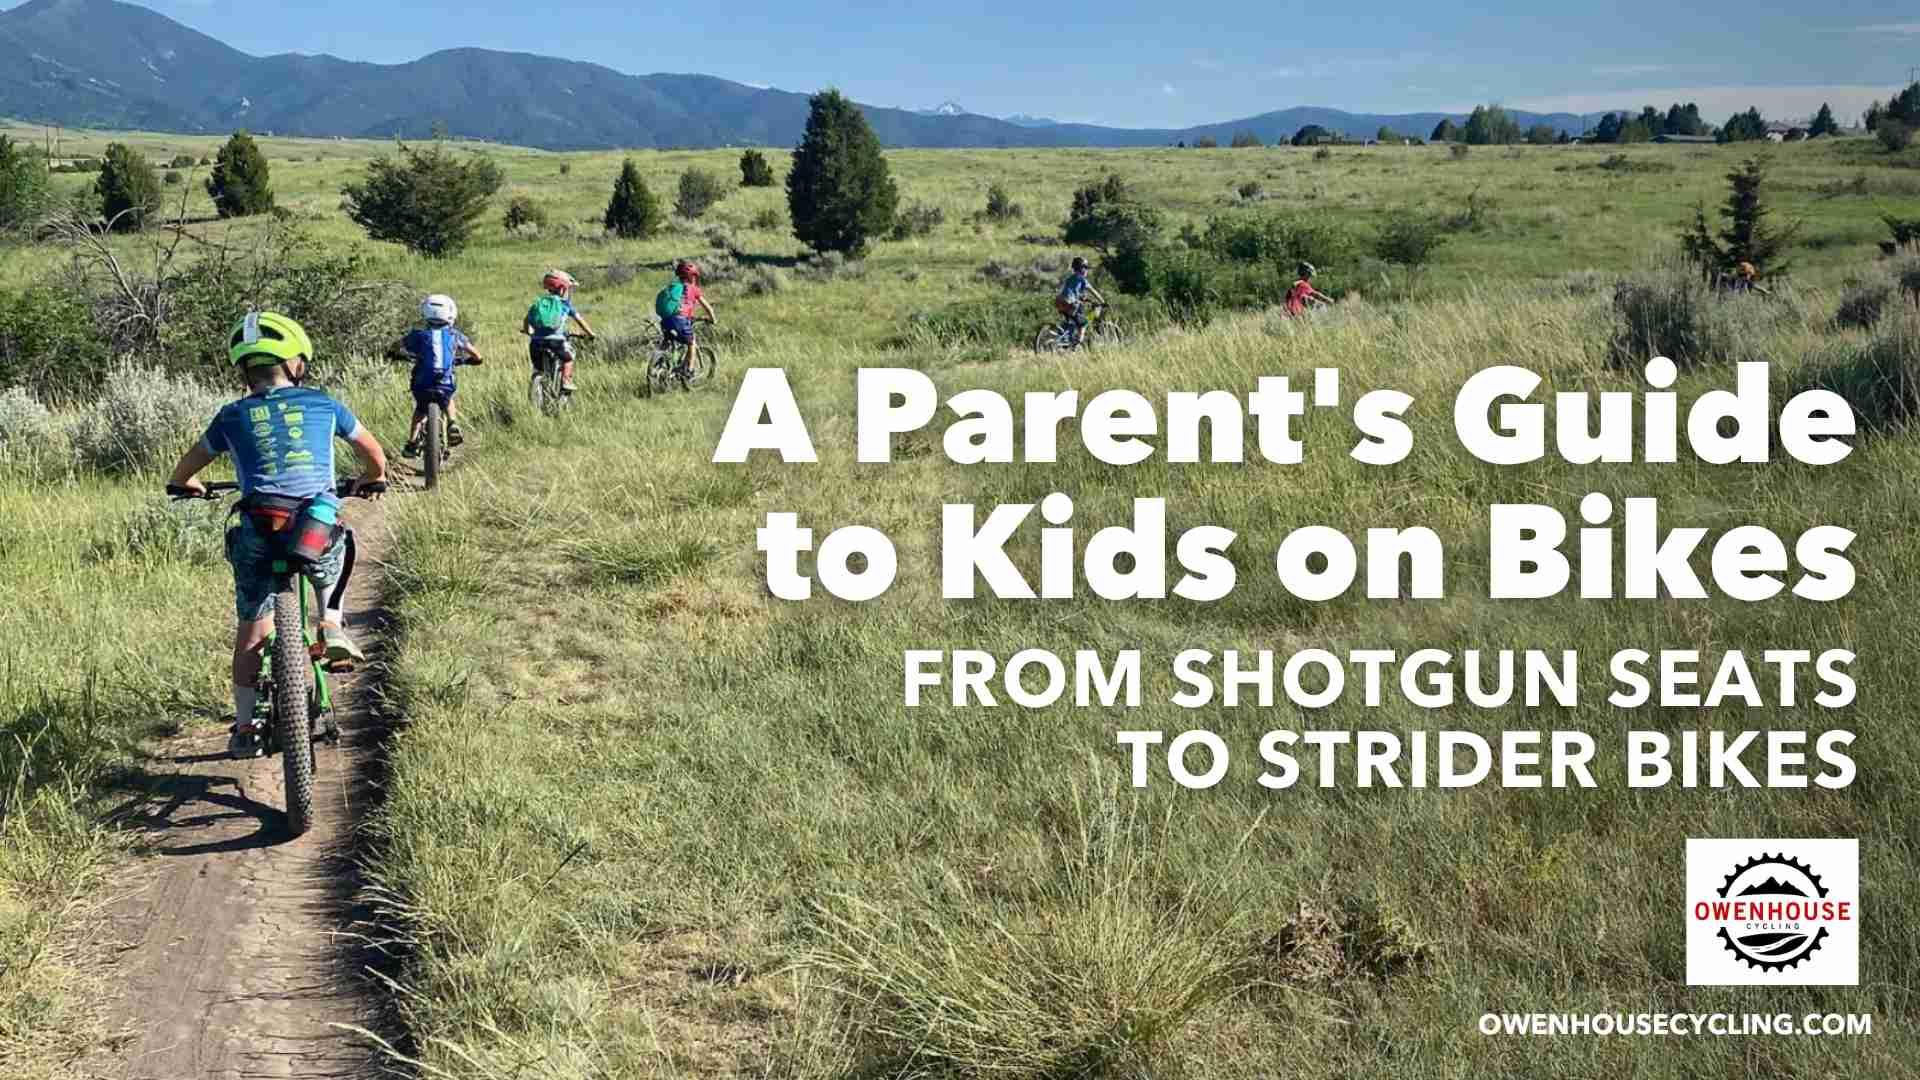 A Parent’s Guide to Kids on Bikes, from Shotgun Seats to Strider Bikes